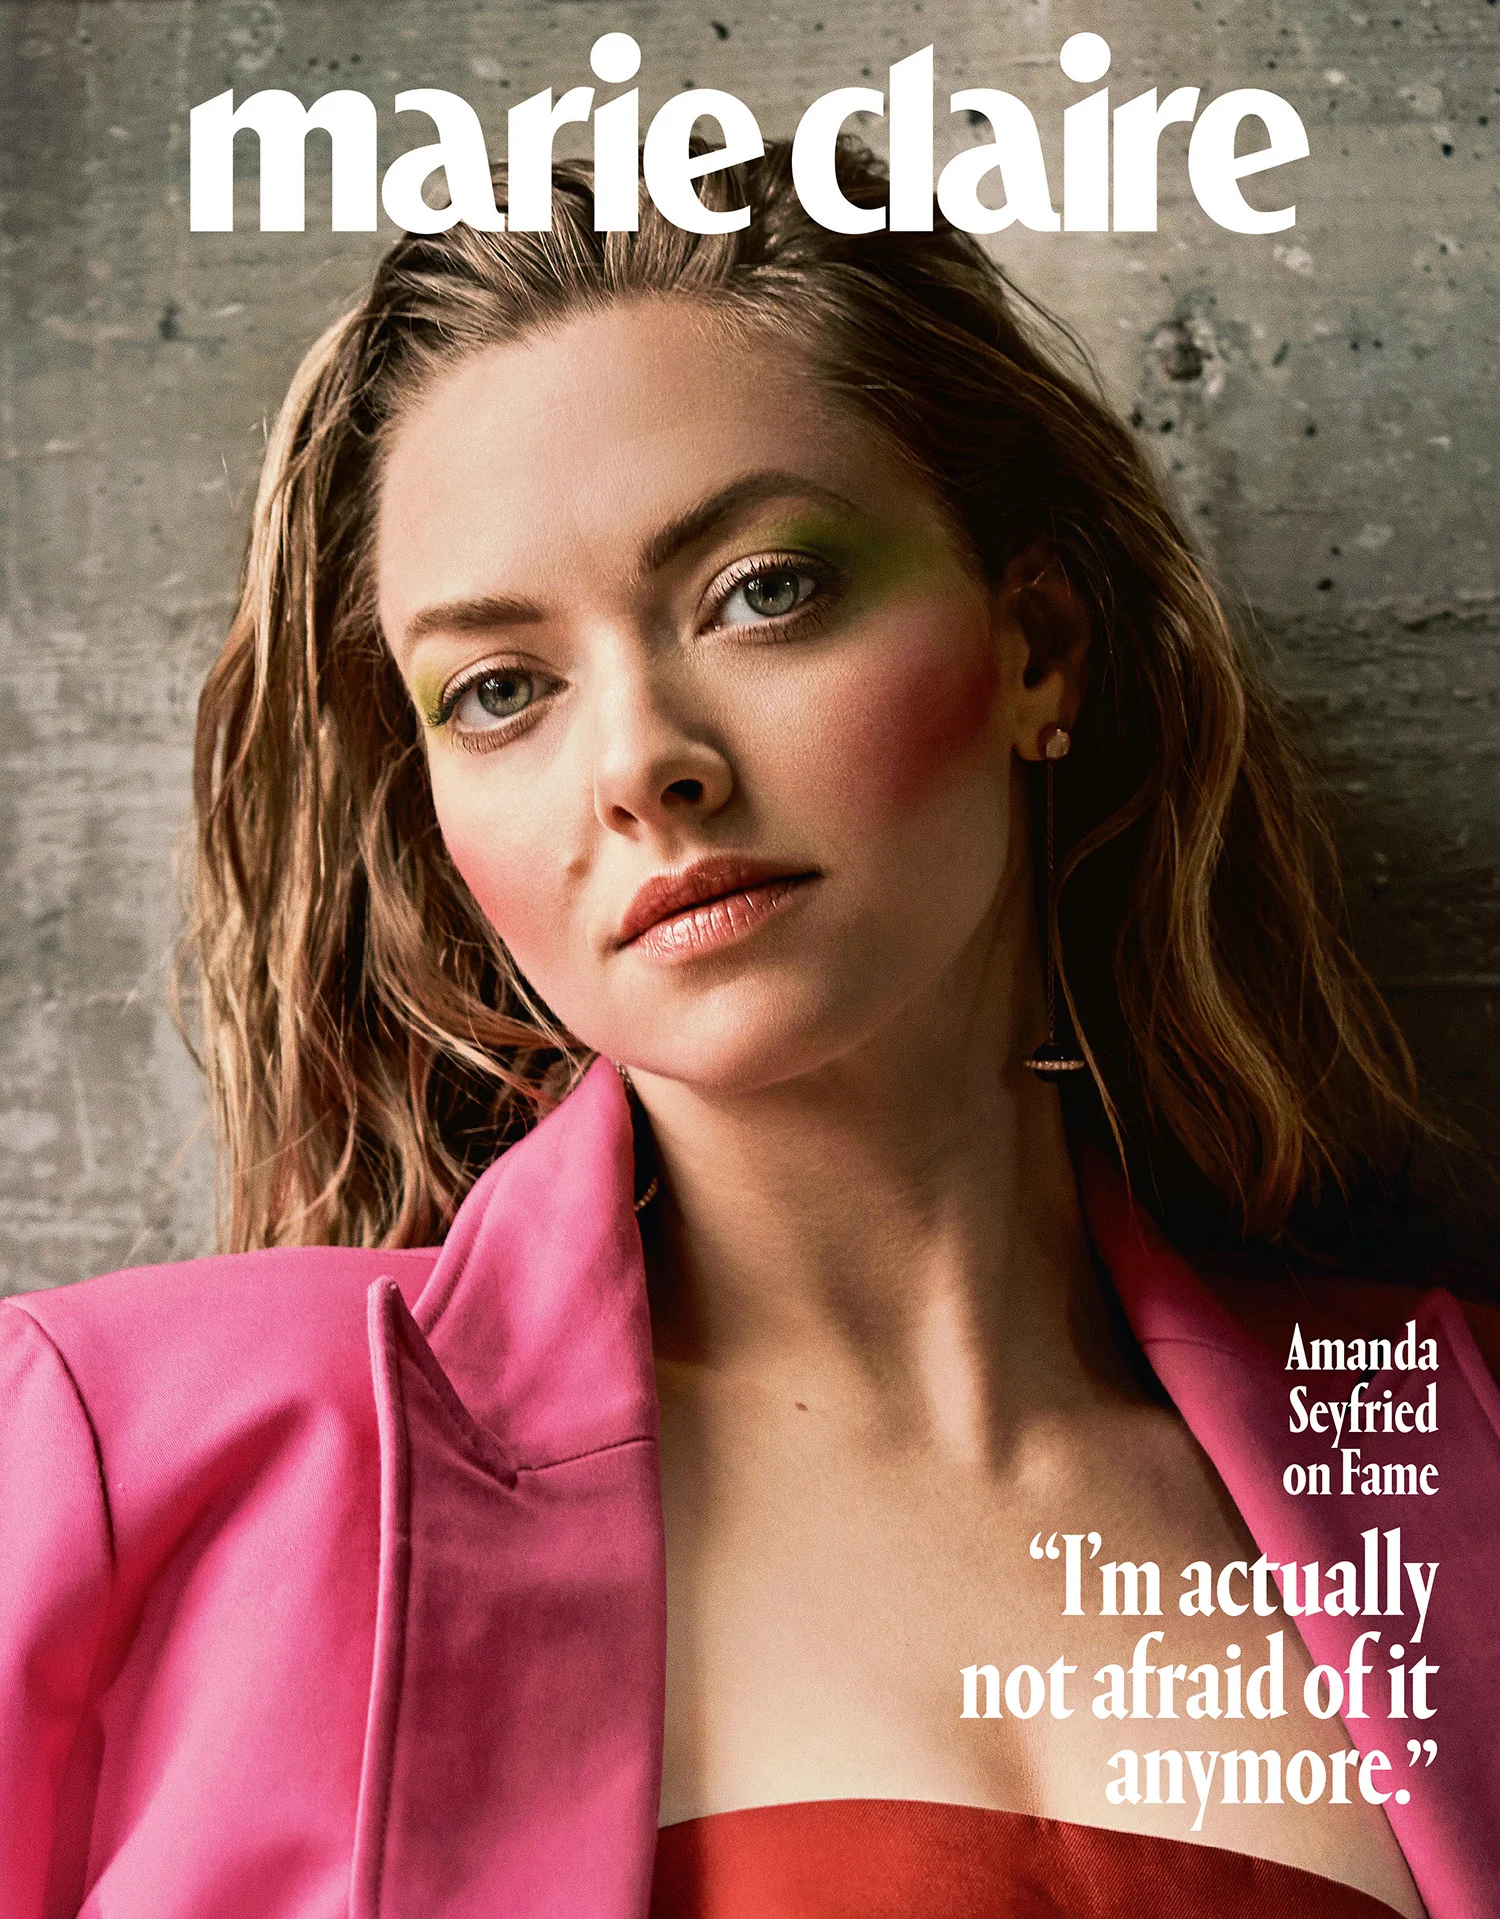 Amanda Seyfried covers Marie Claire US May 2022 by Victoria Will